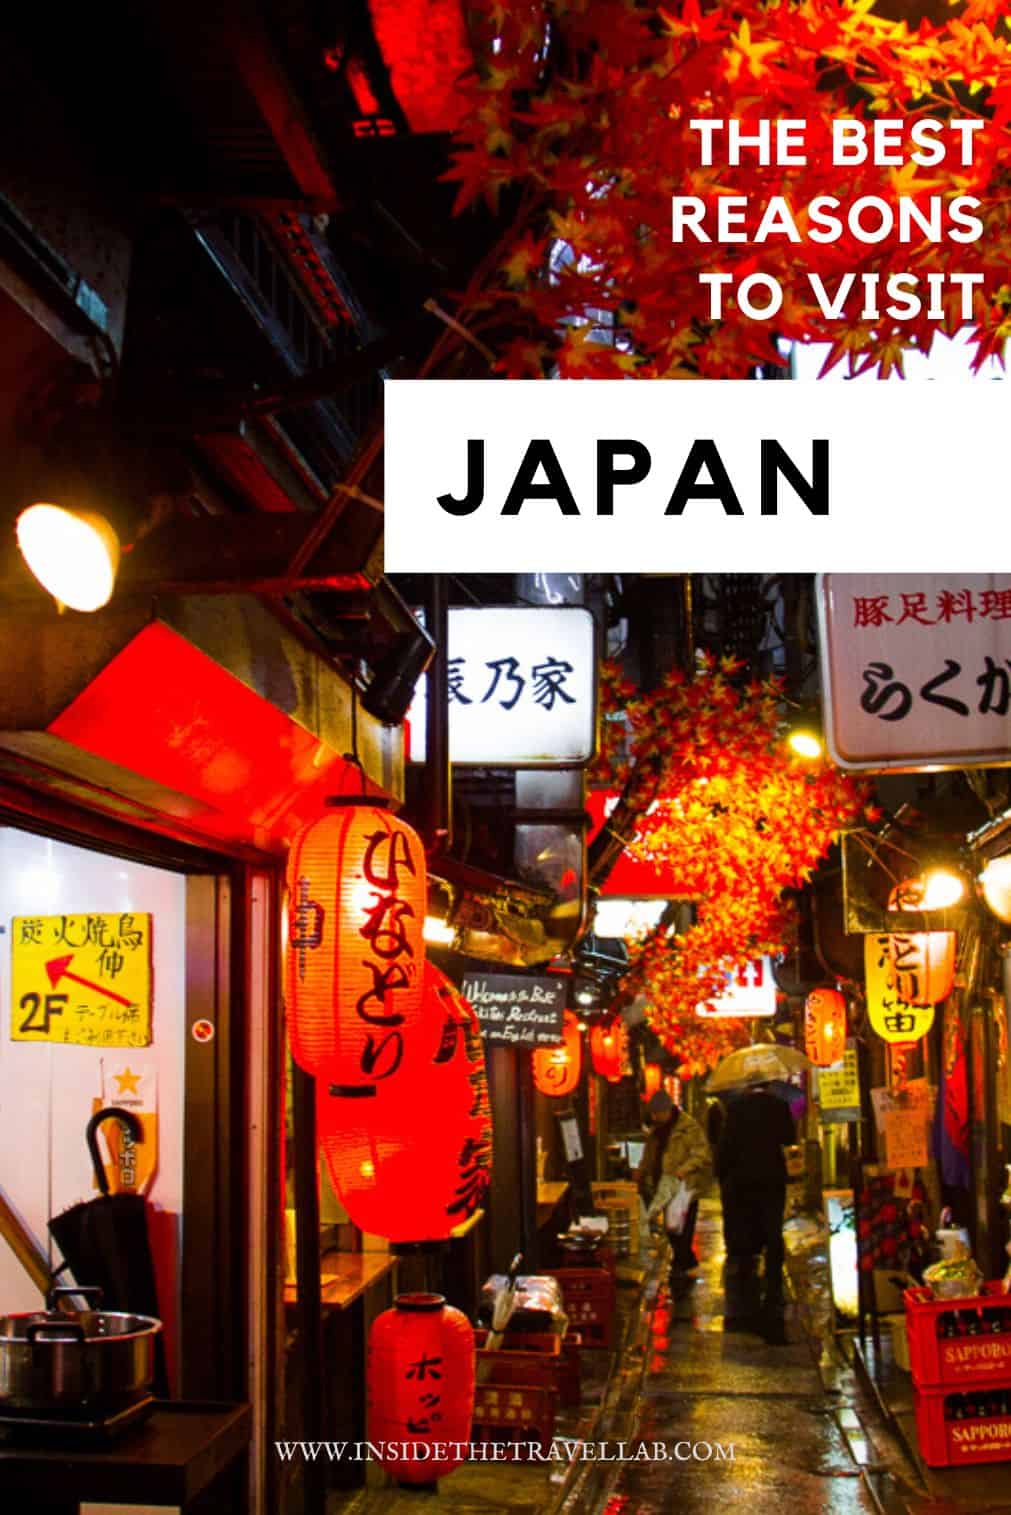 The best reasons to visit Japan cover image